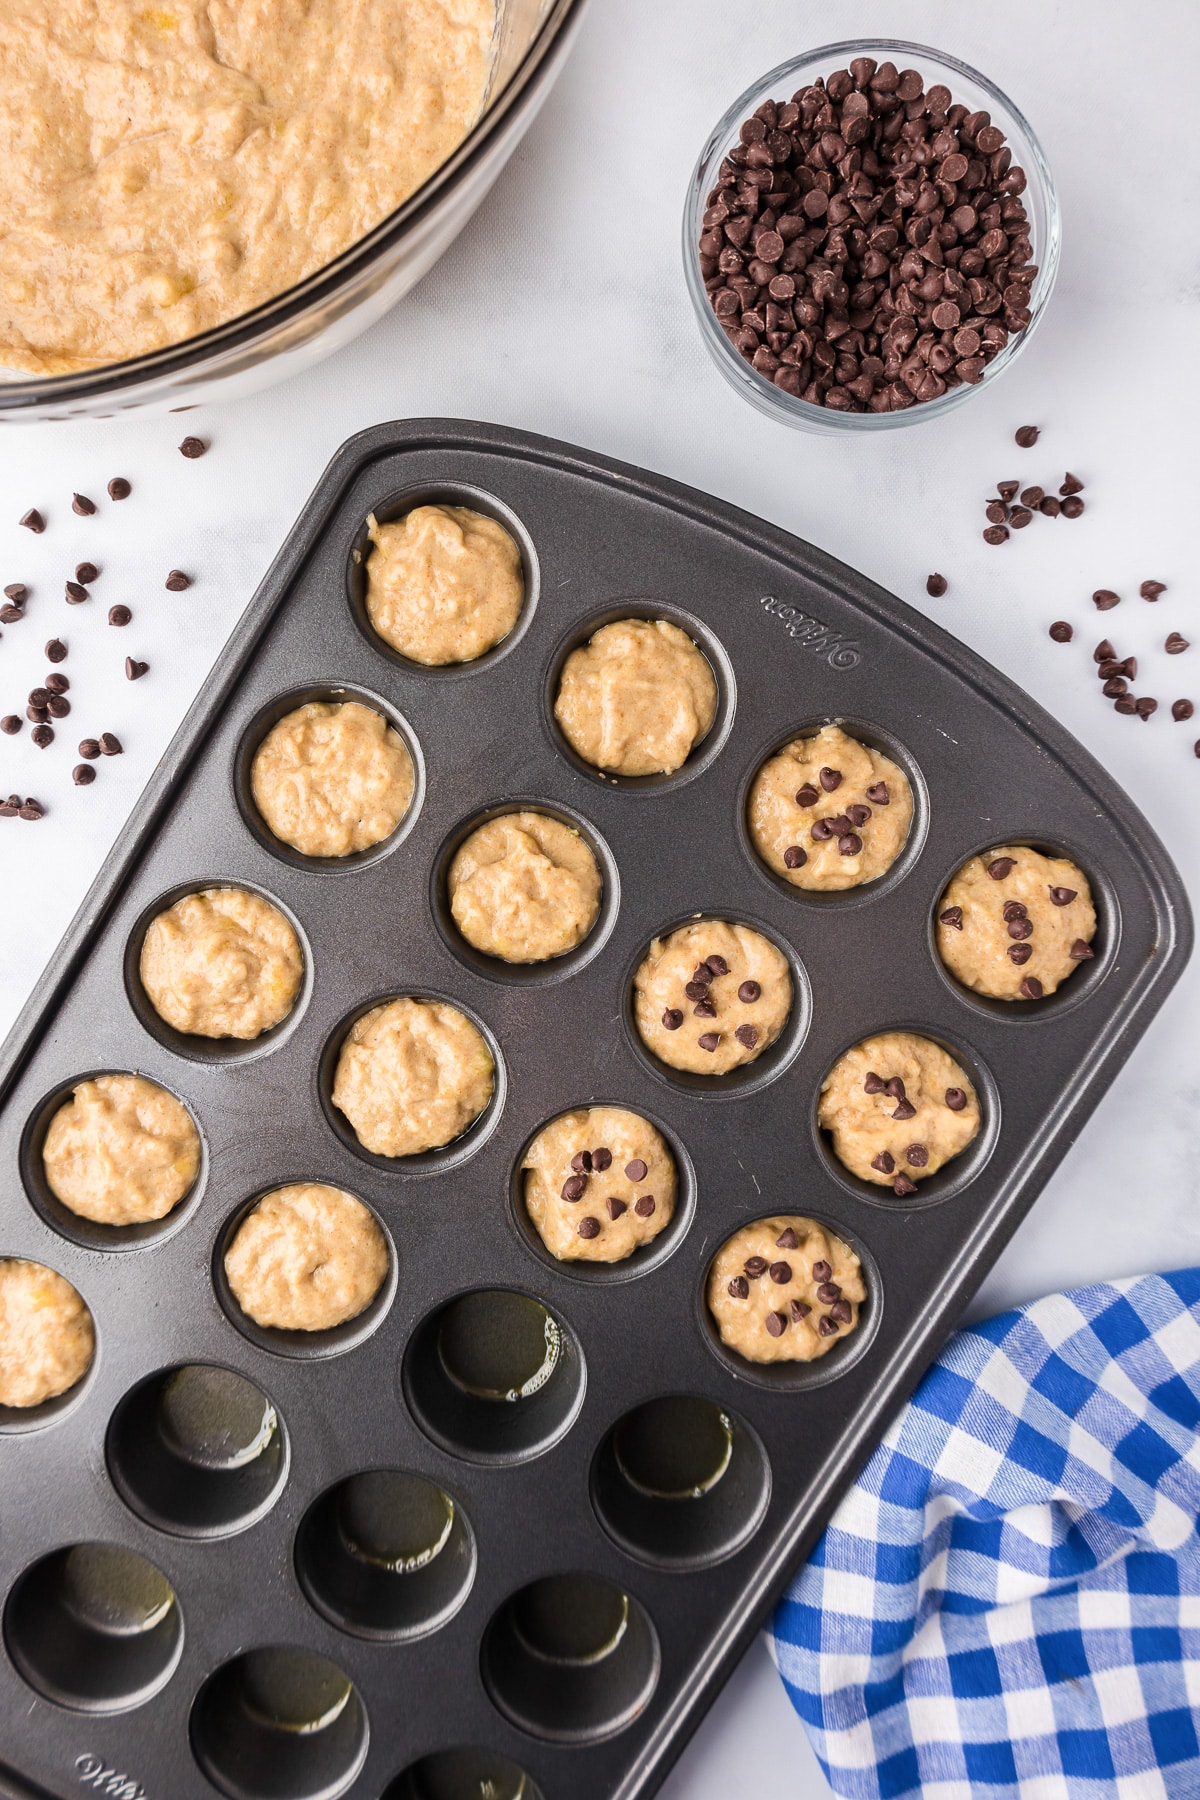 Unbaked muffin banana chocolate chip mini muffins batter being filled in a muffin tin with chocolate chips being sprinkled on top.